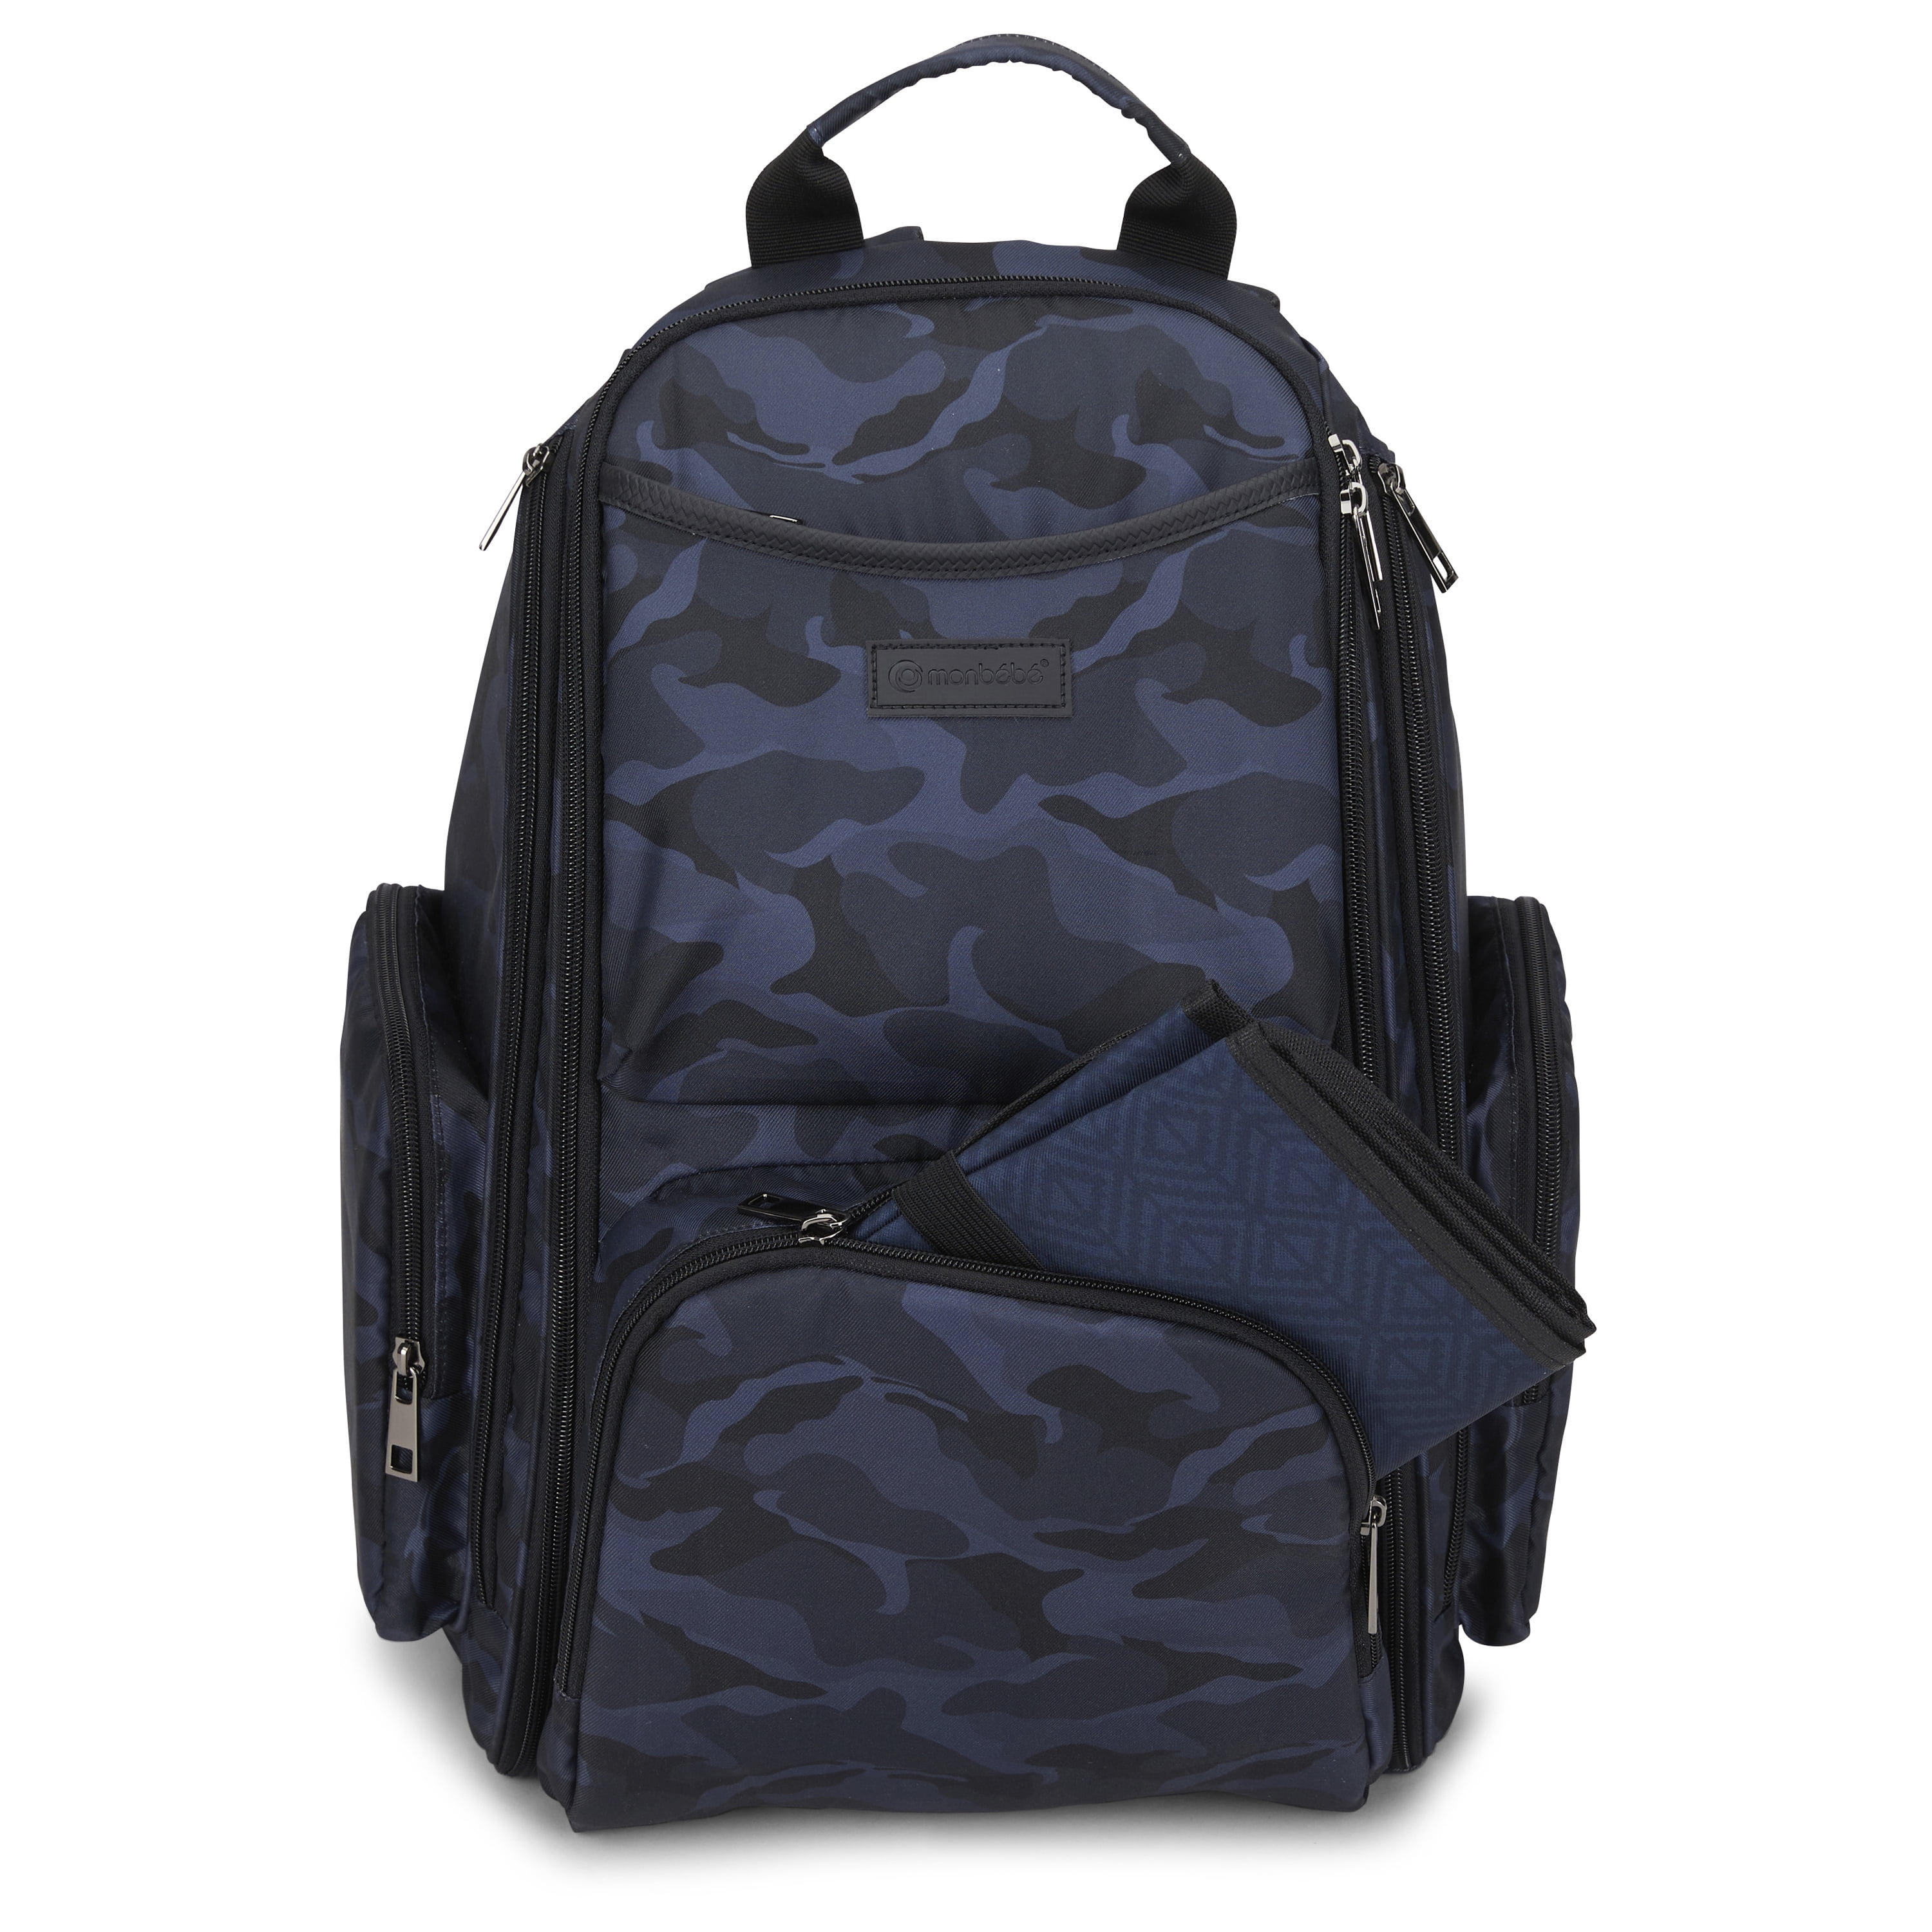 Monbebe Metro Diaper Bag Backpack with Changing Pad, Navy Camo